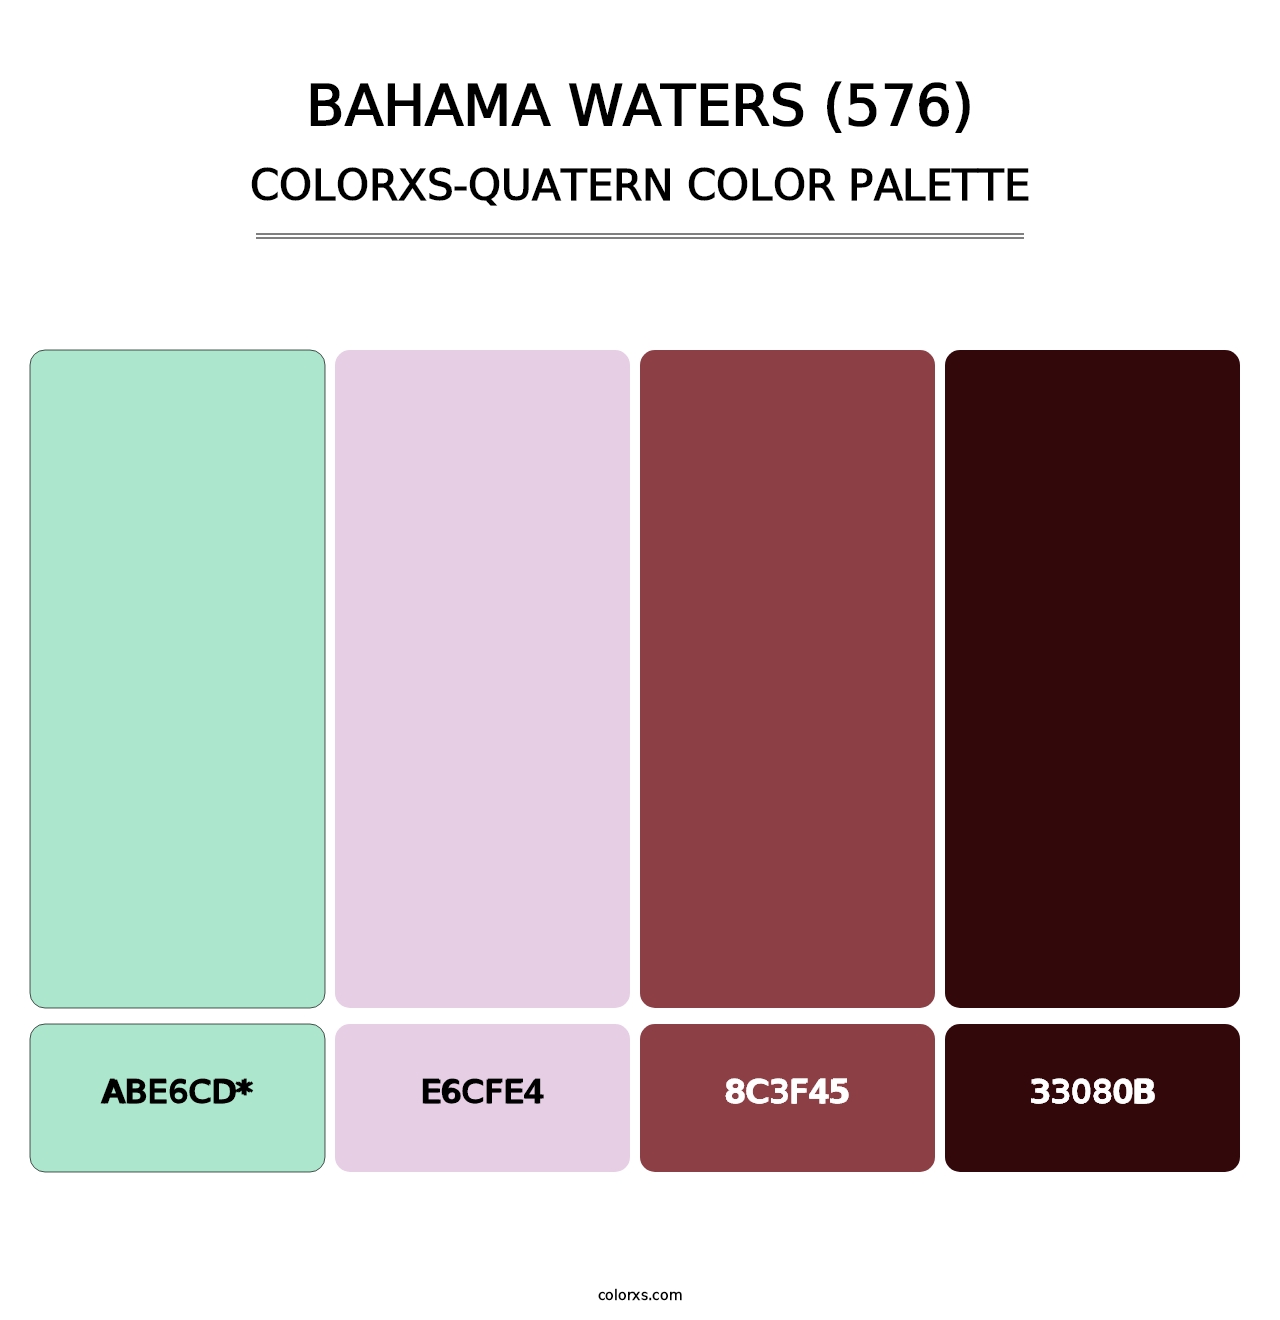 Bahama Waters (576) - Colorxs Quatern Palette